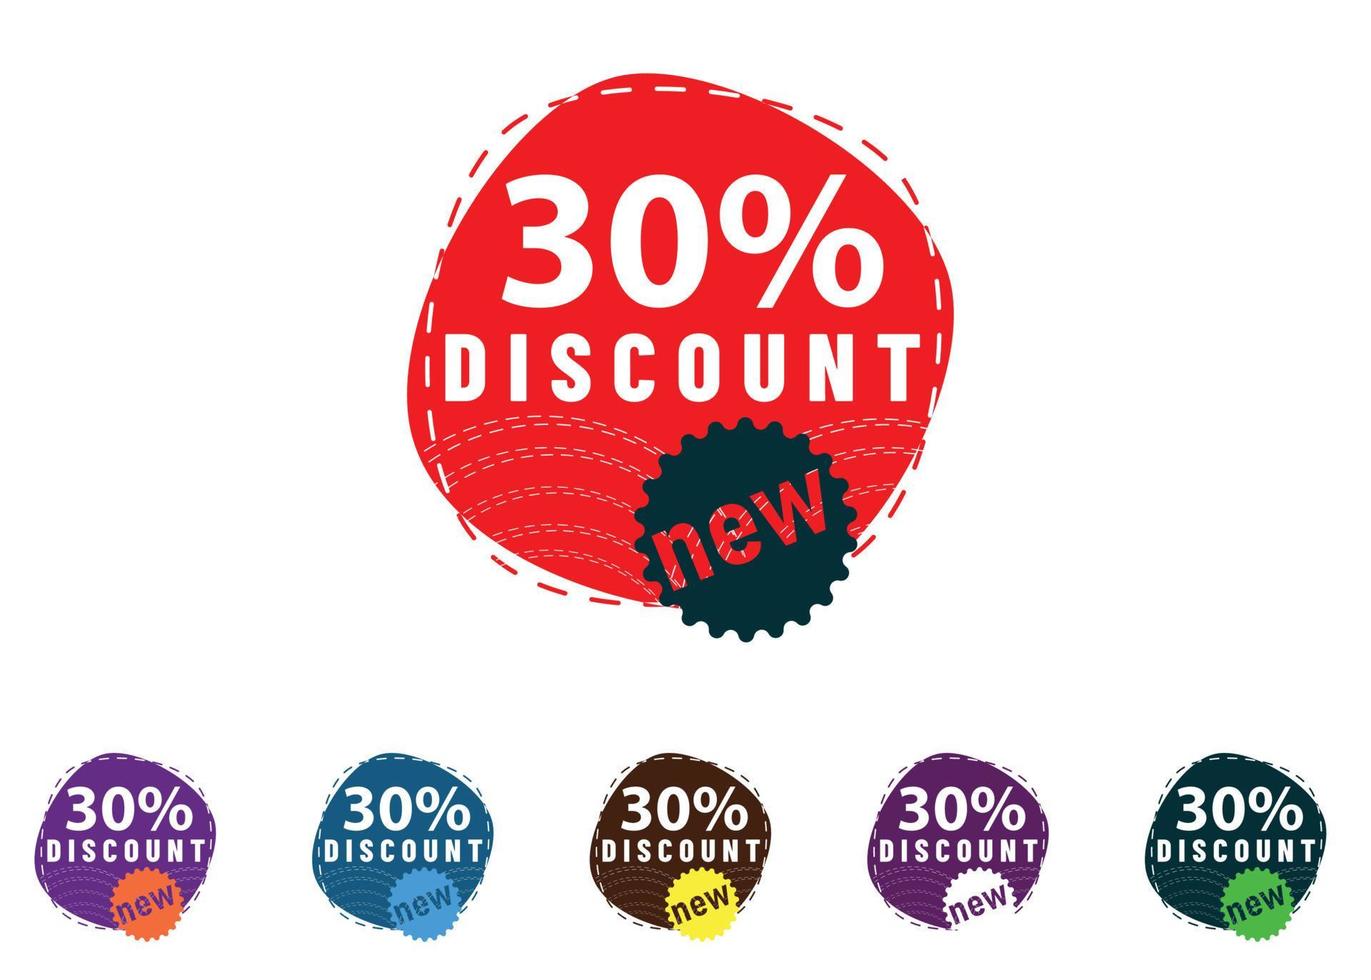 30 percent discount new offer logo and icon design vector